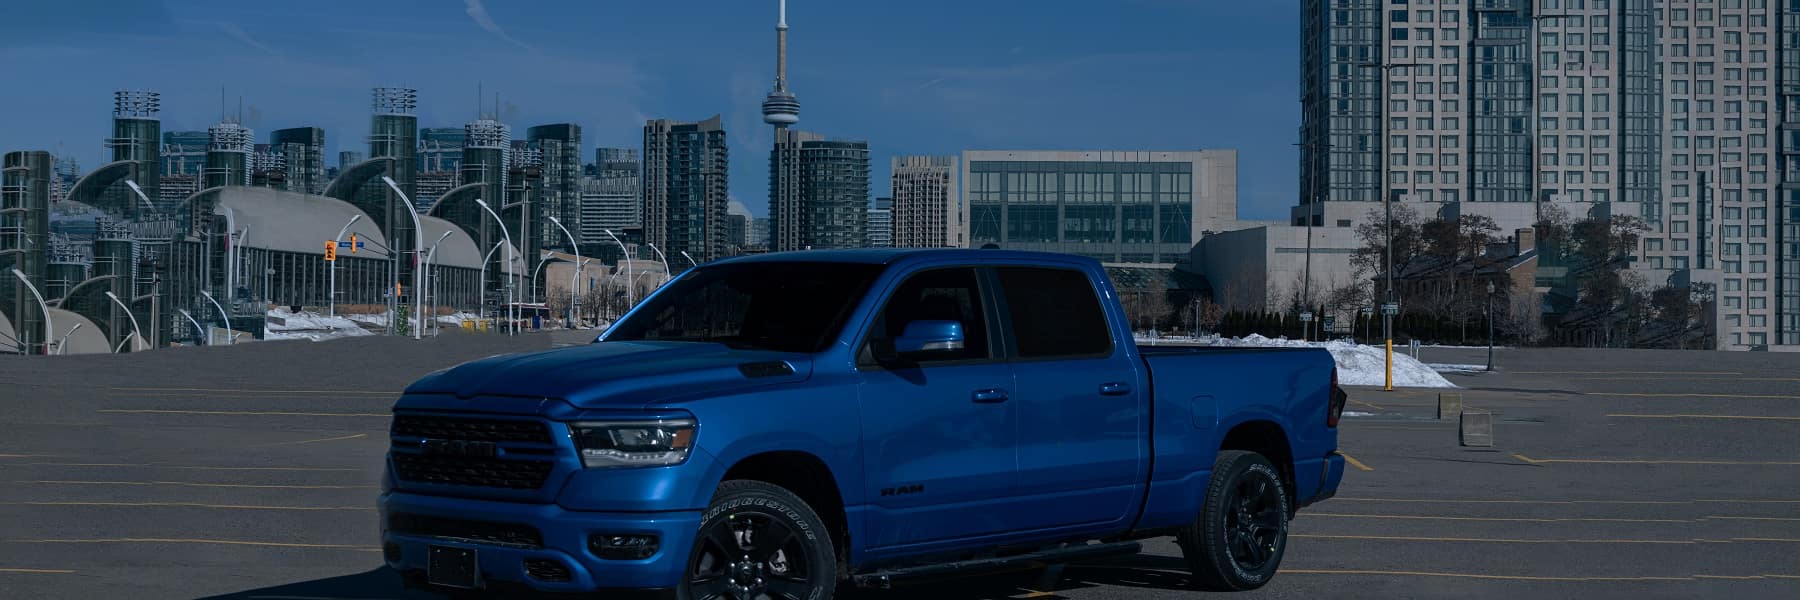 Blue truck parked in Mississauga, Toronto